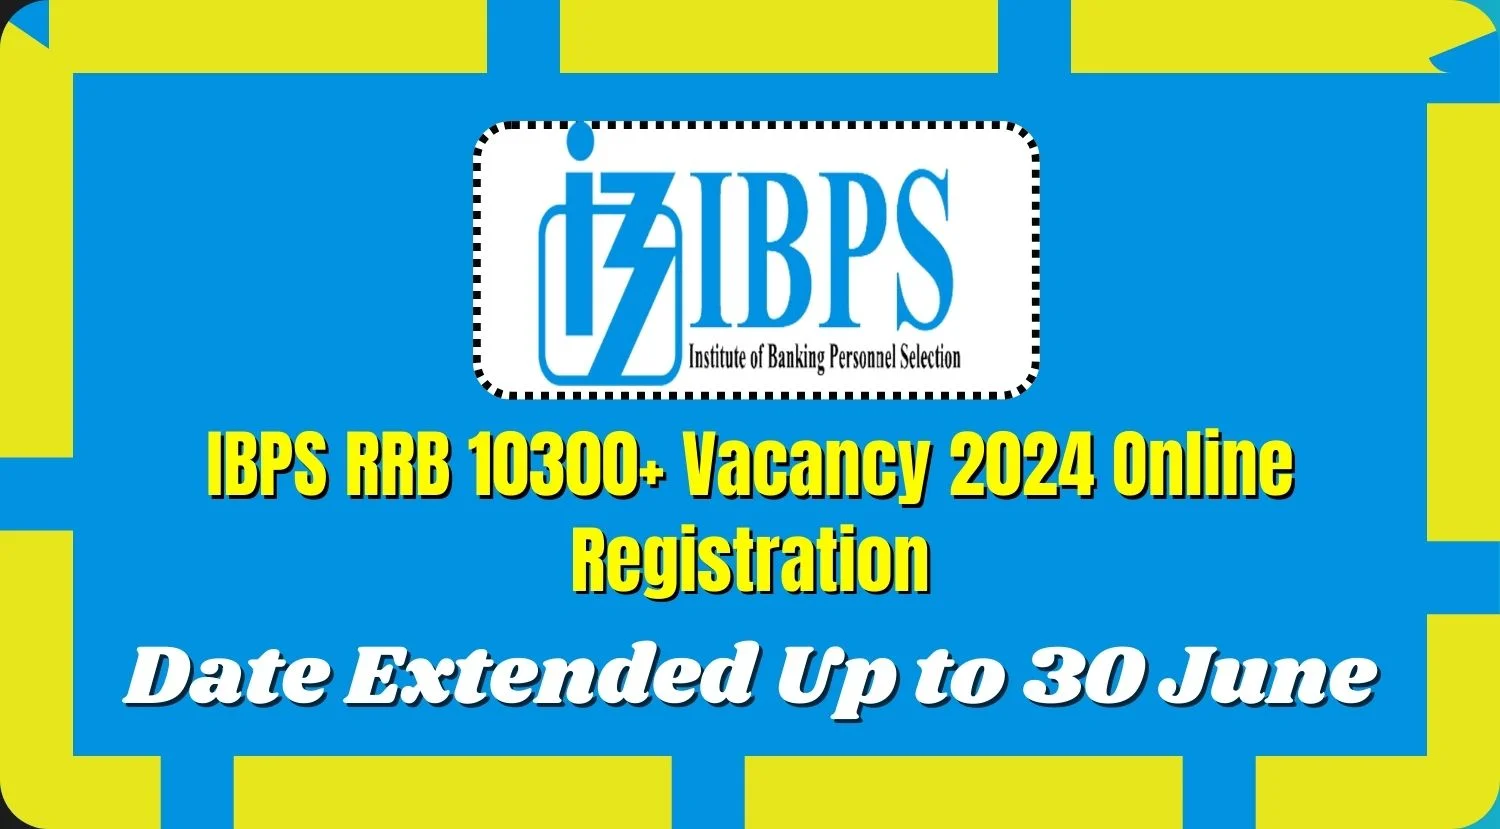 IBPS RRB 10300+ Vacancy 2024 Online Registration Date Extended Up to 30 June